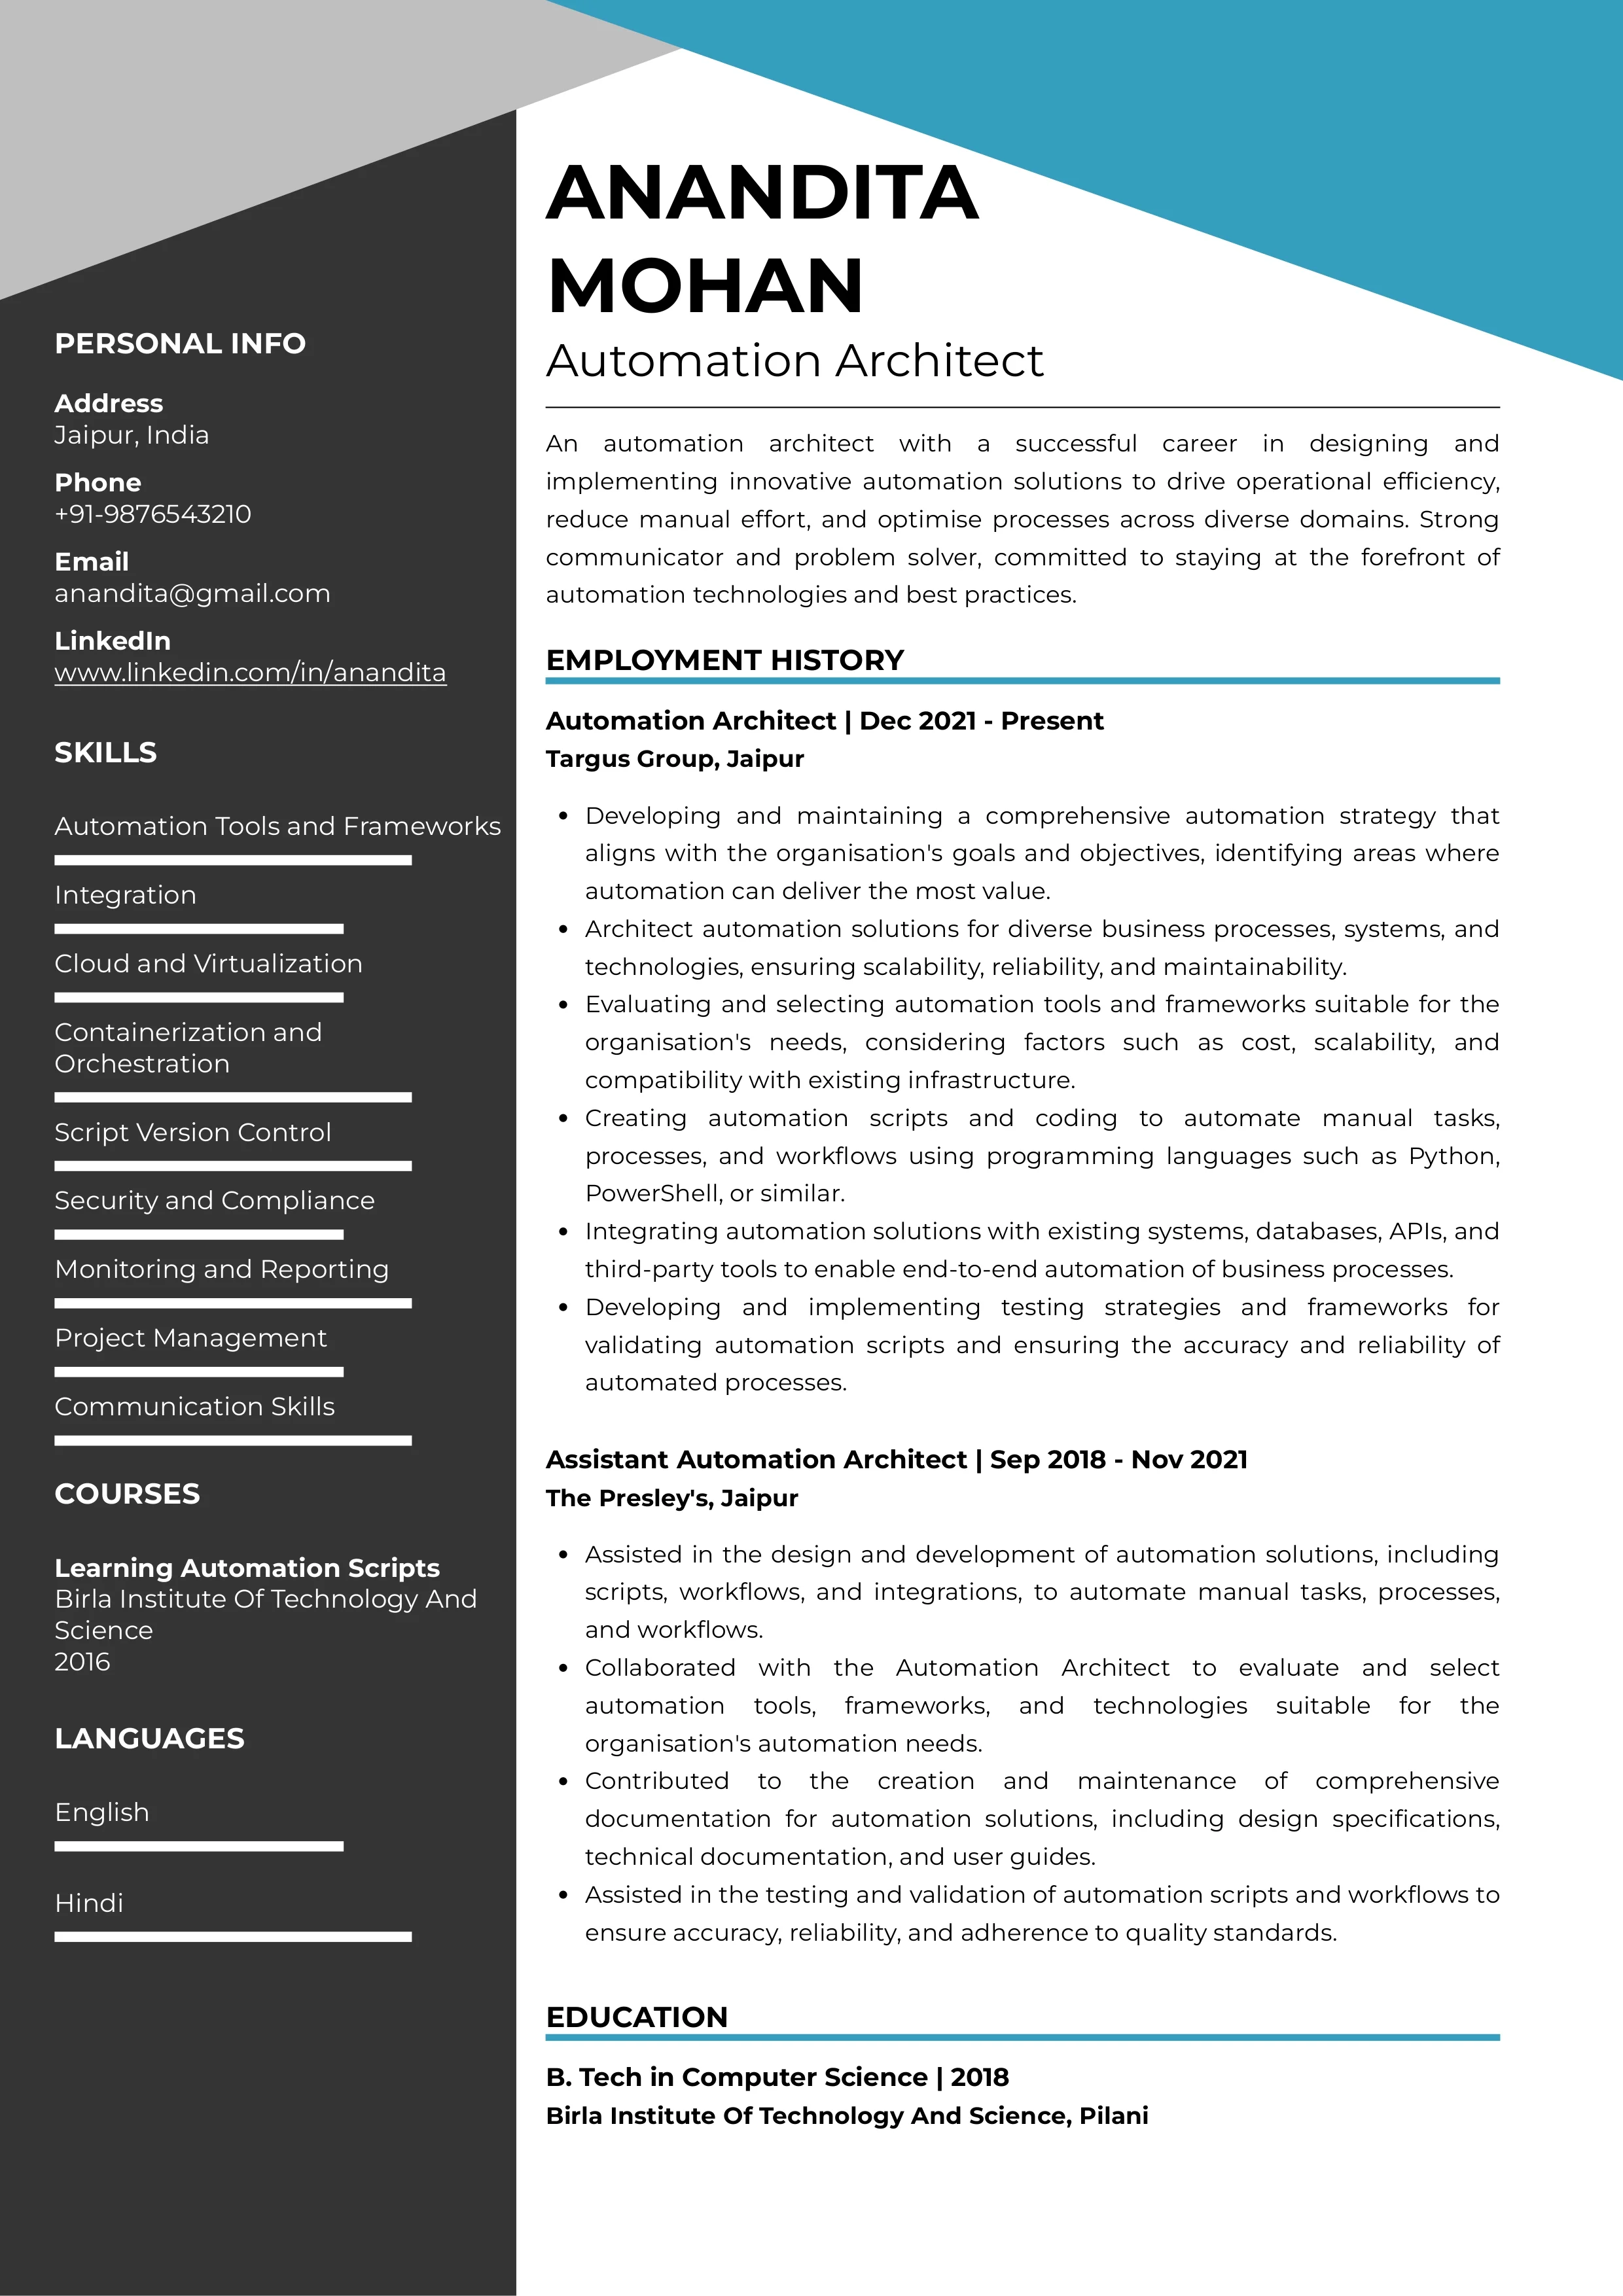 Sample Resume of Automation Architect | Free Resume Templates & Samples on Resumod.co